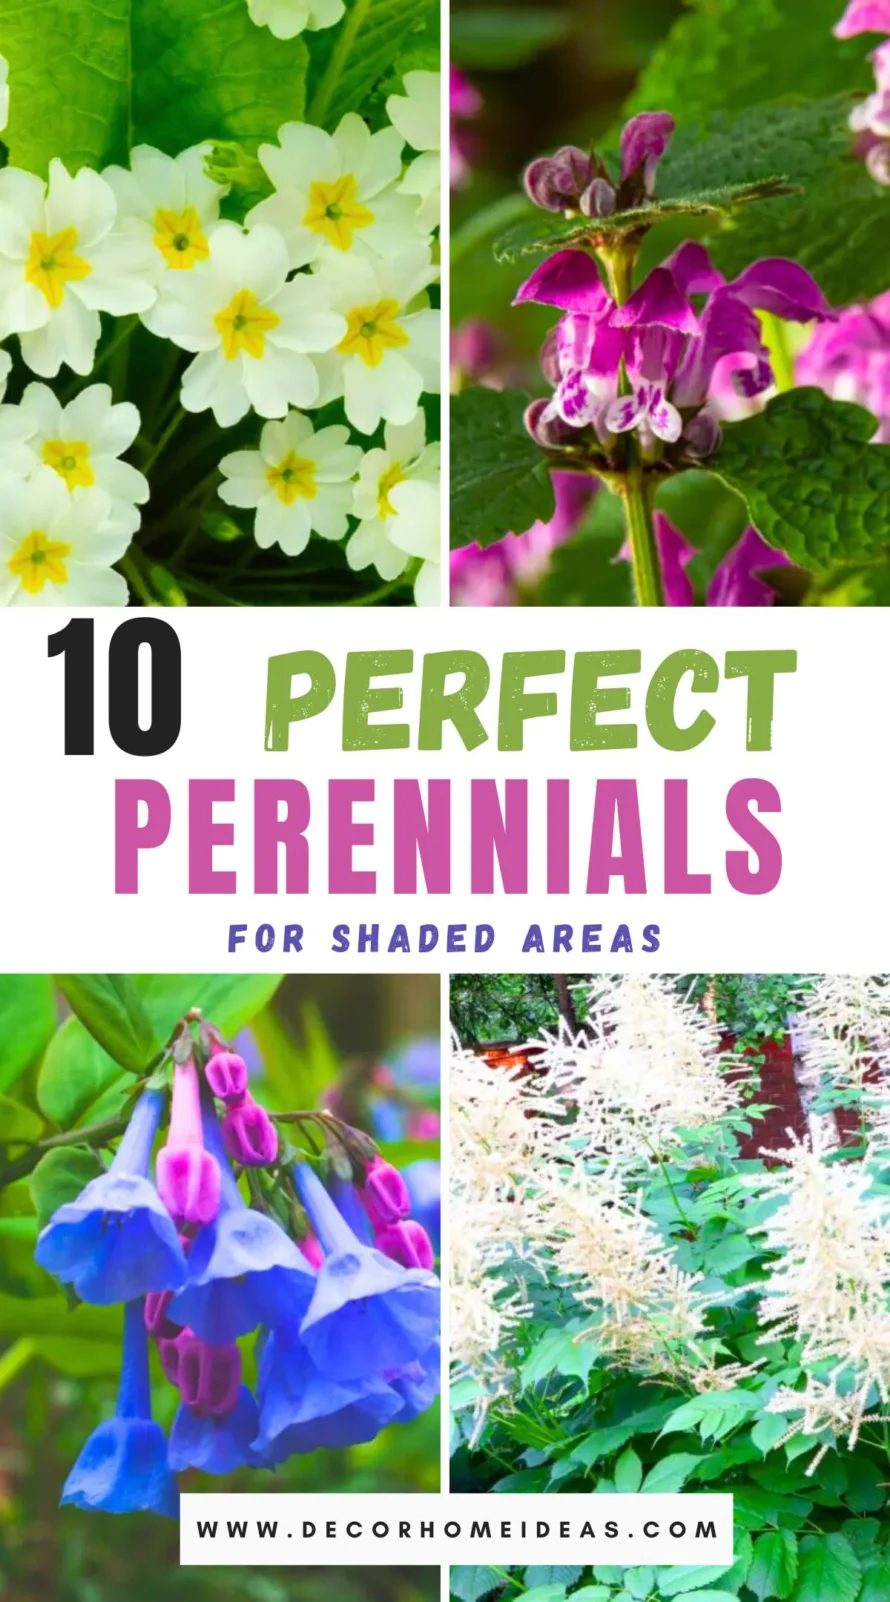 Discover 10 perfect perennials that thrive in shaded areas, turning your garden's darker corners into lush, vibrant retreats. From colorful blooms to rich foliage, these hardy plants are designed to flourish where sunlight is scarce. Learn how to create a stunning, low-maintenance garden that bursts with life in every nook and cranny.